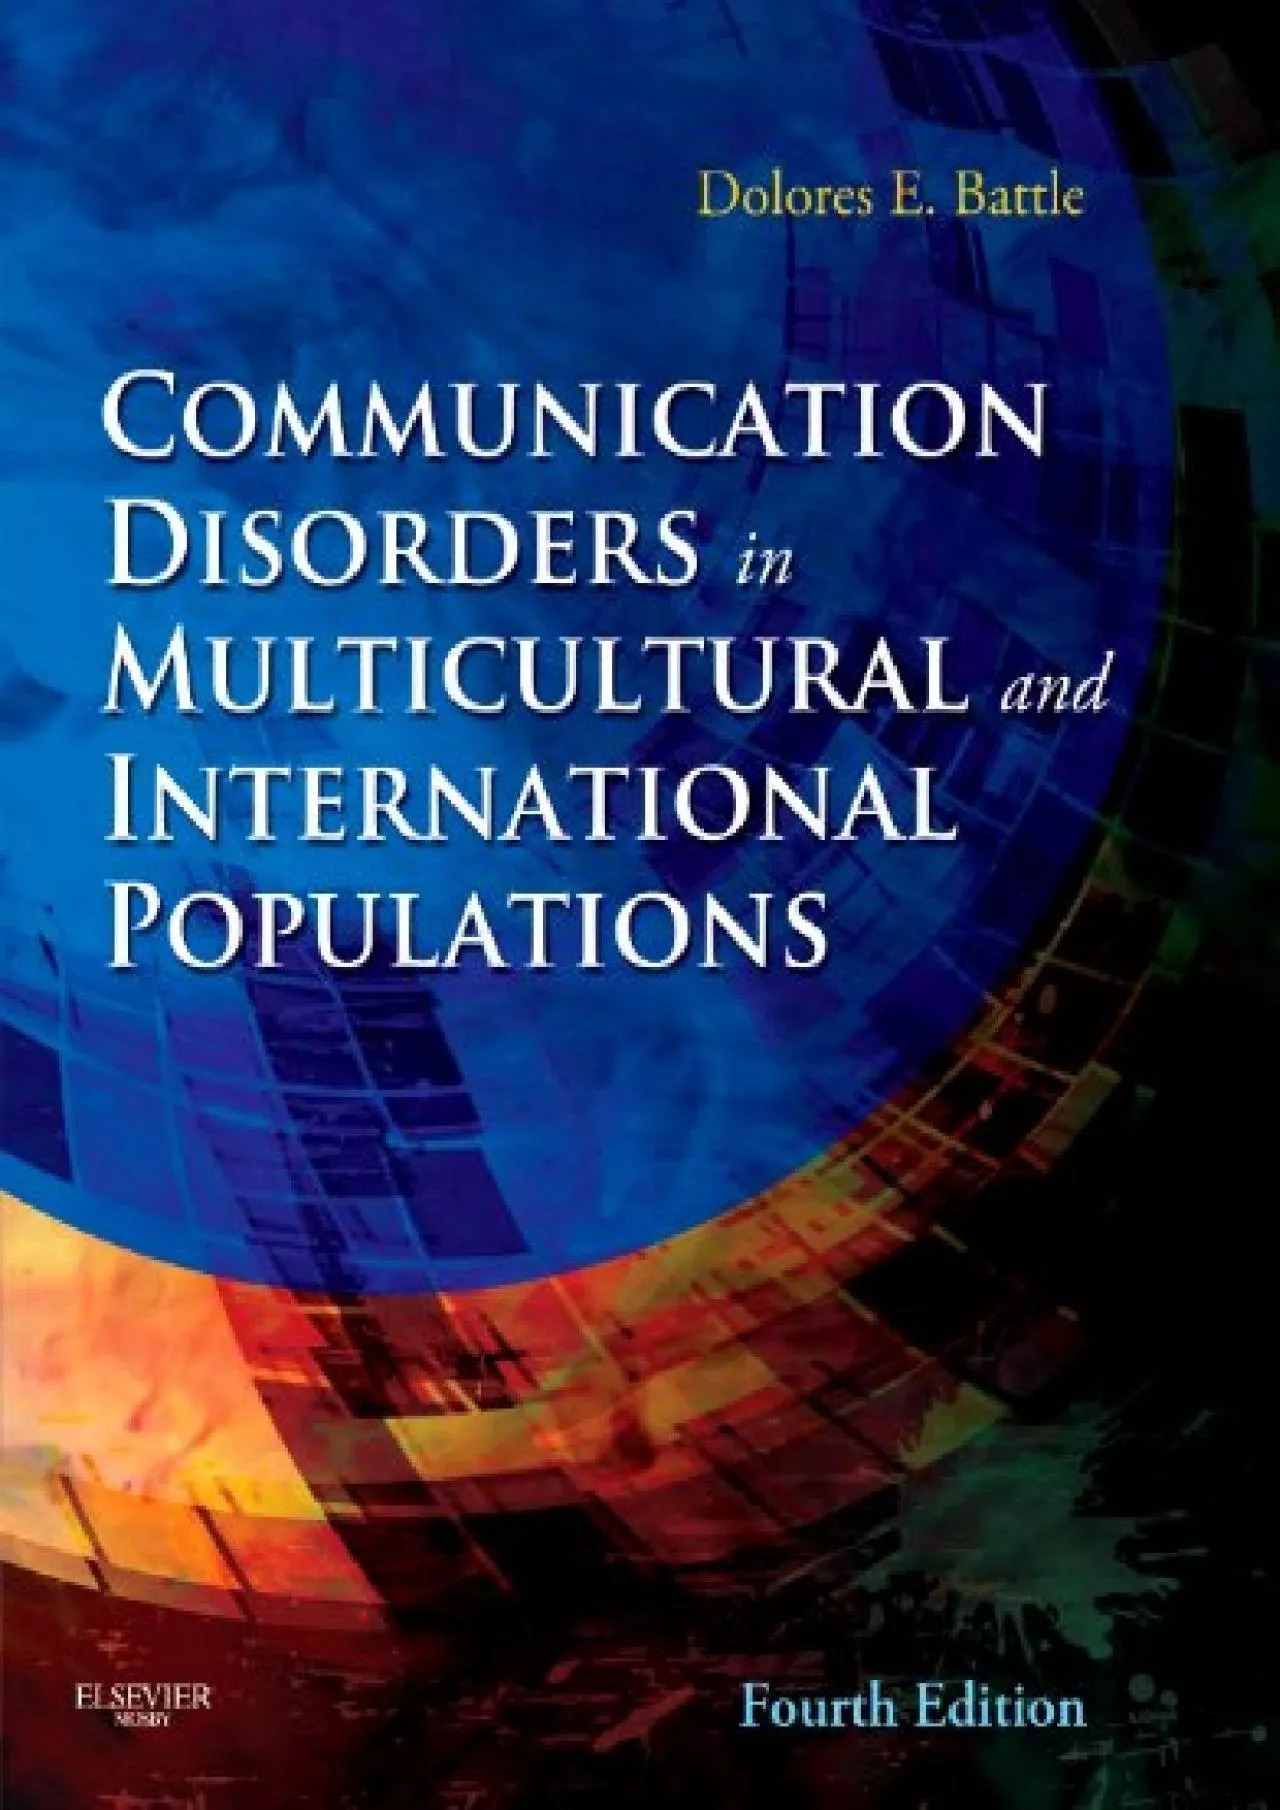 (BOOS)-Communication Disorders in Multicultural and International Populations (Communication